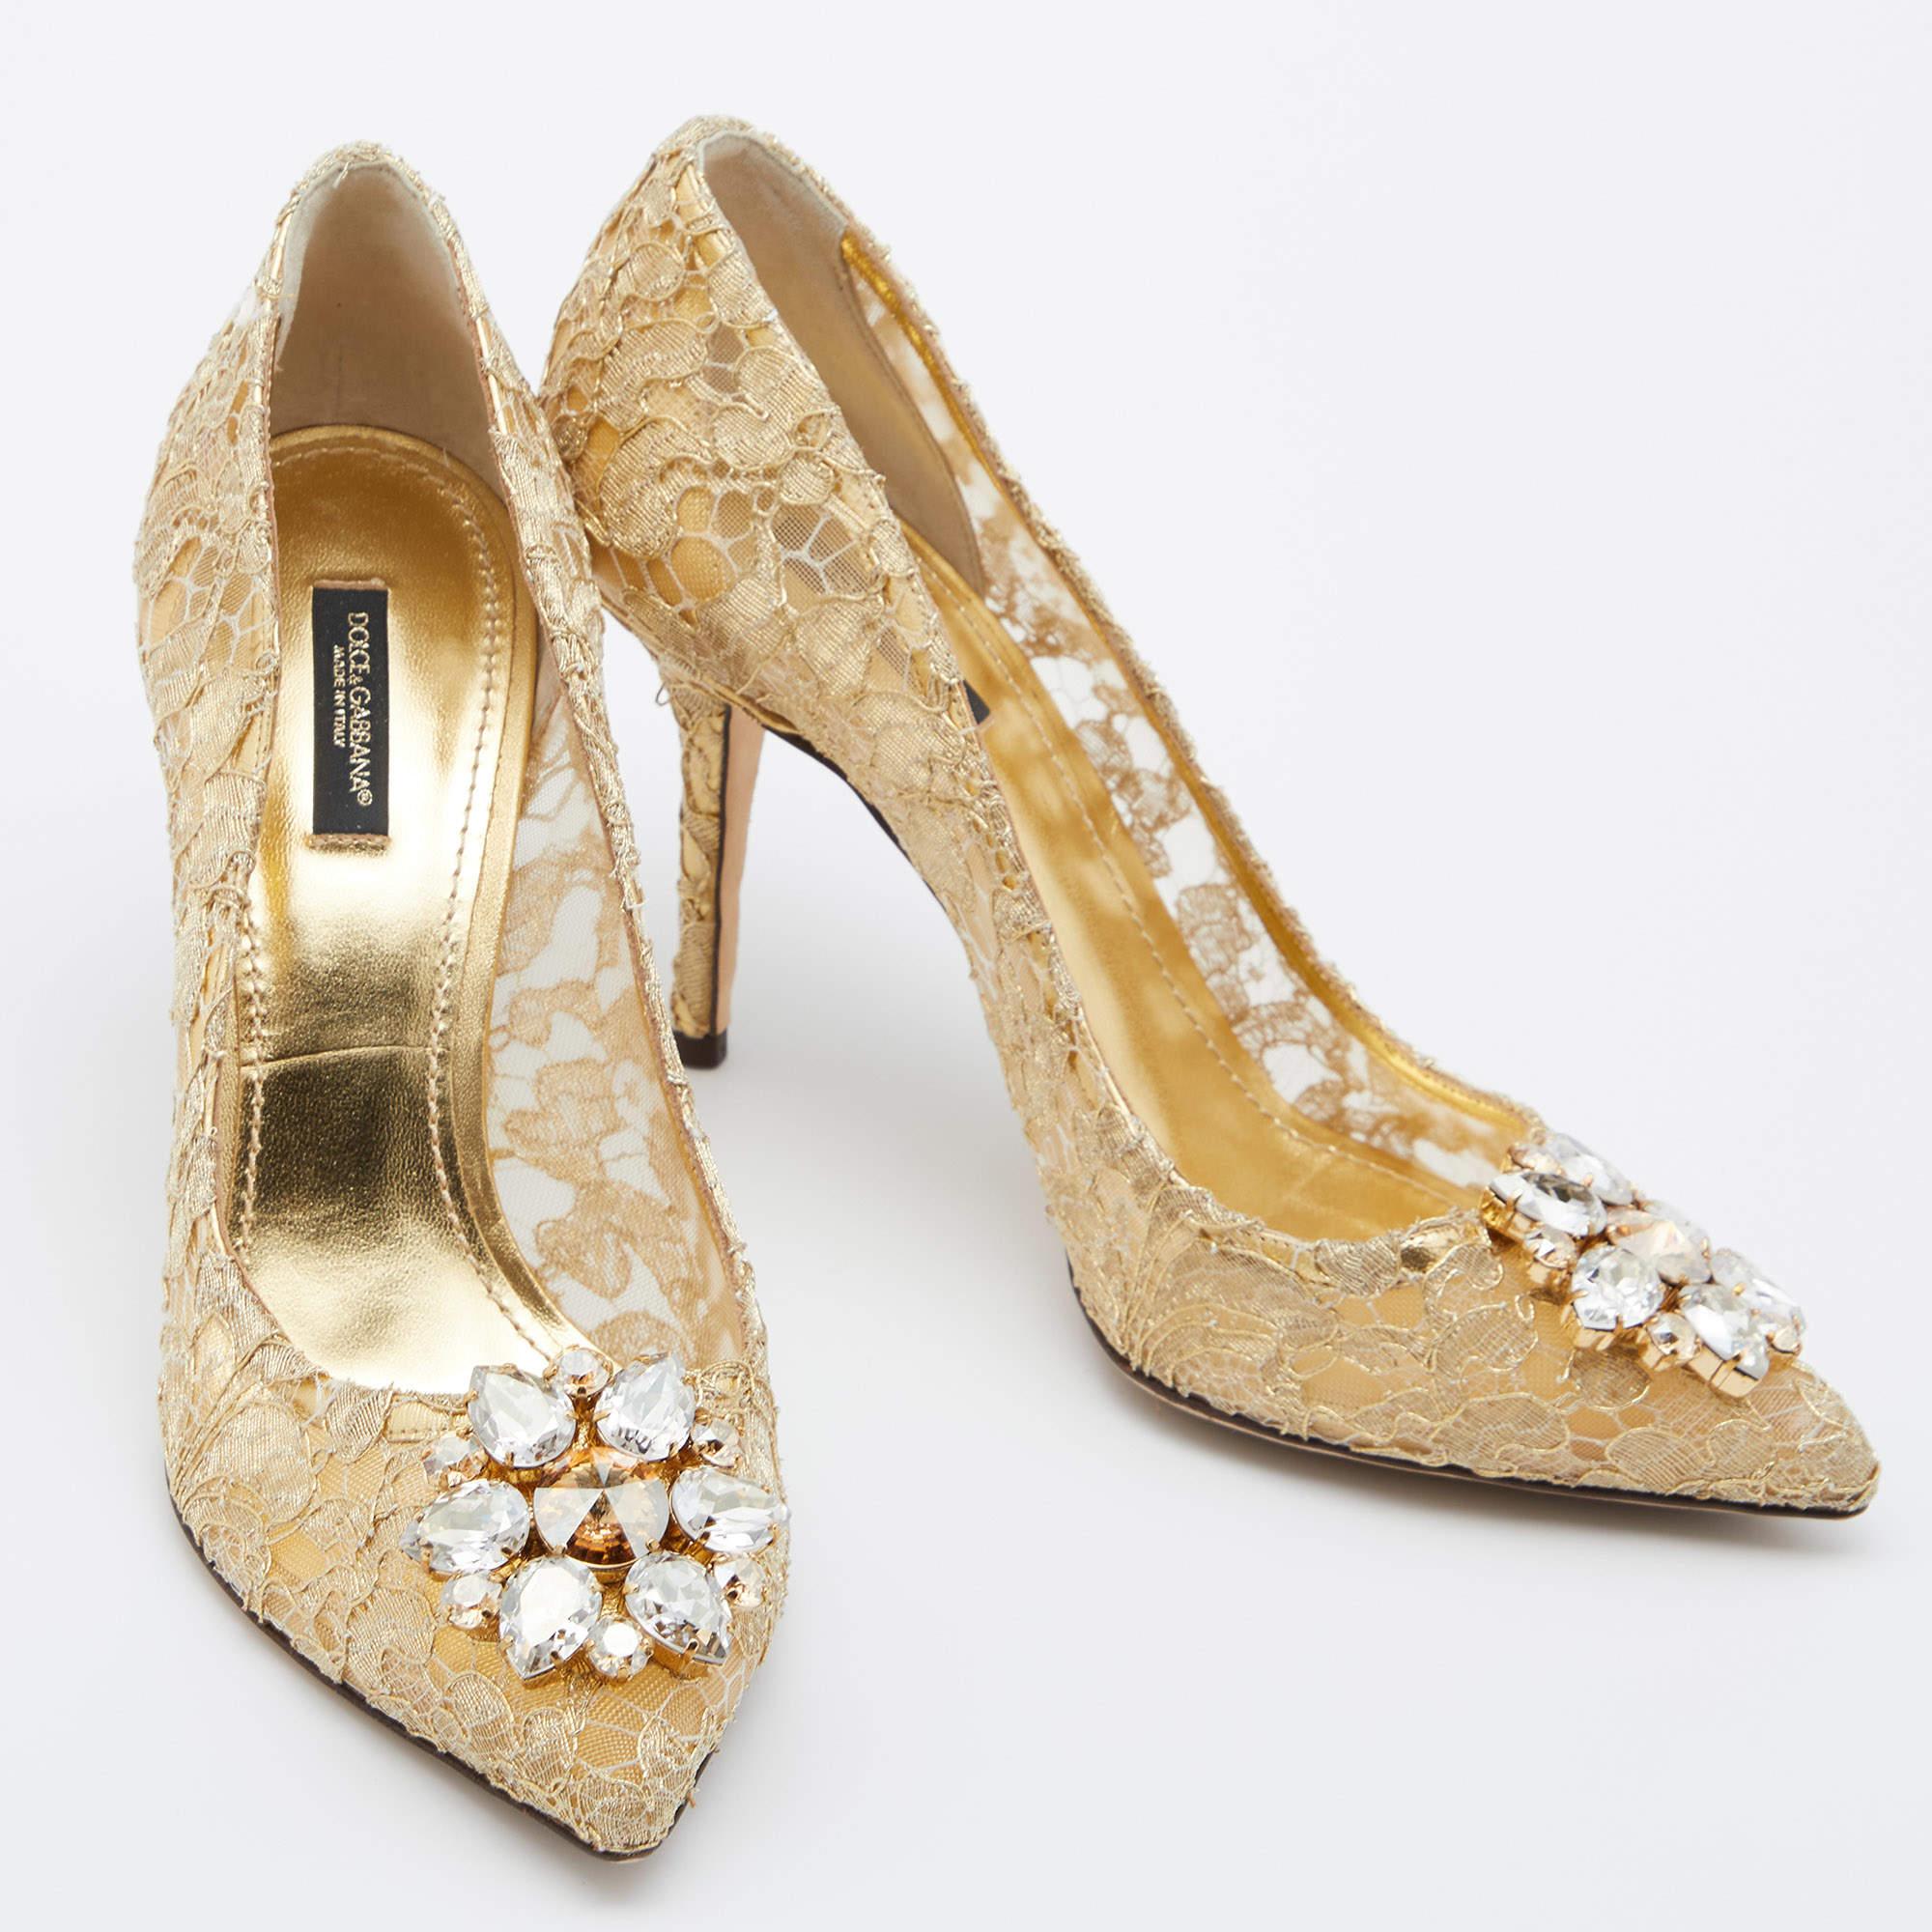 These pumps by Dolce & Gabbana are perfect to be paired with any outfit of your choice. Luxe, stylish and elegant, they have been crafted from lace and styled with pointed toes, slim heels, and crystals.

Includes: Original Dustbag